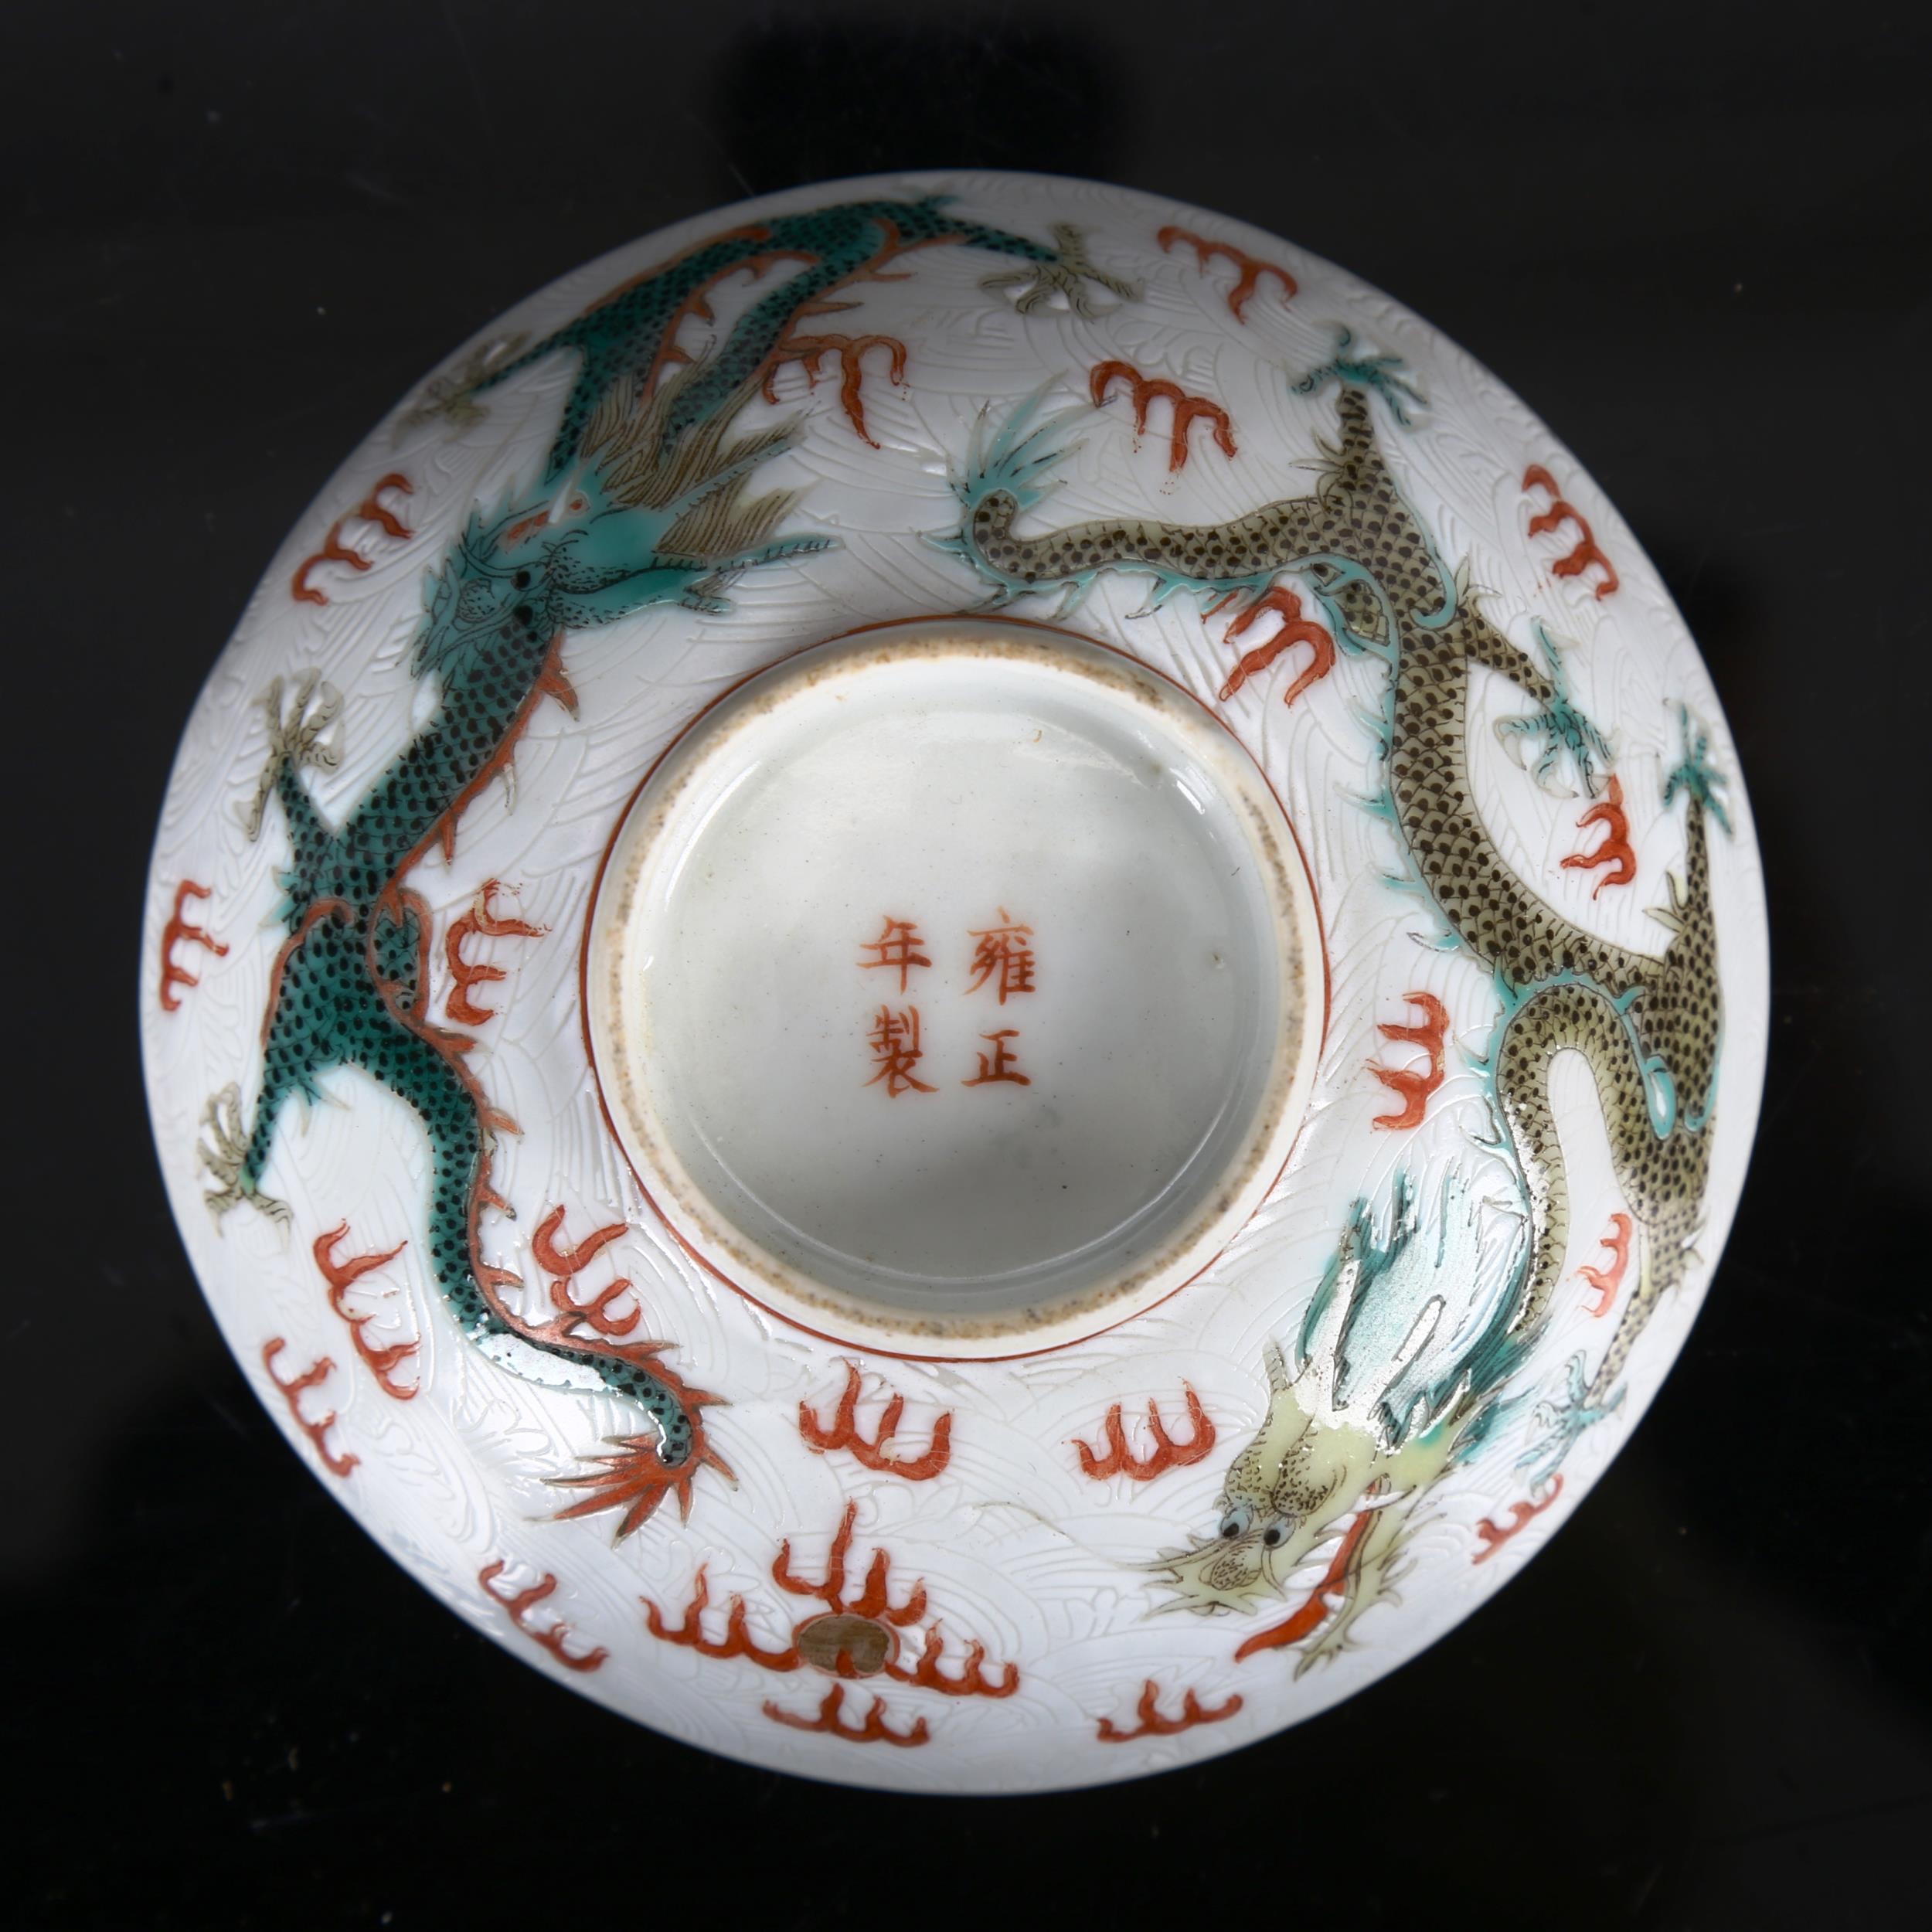 A Chinese white glaze porcelain bowl, with painted enamel dragons and pearls, 4 character mark,